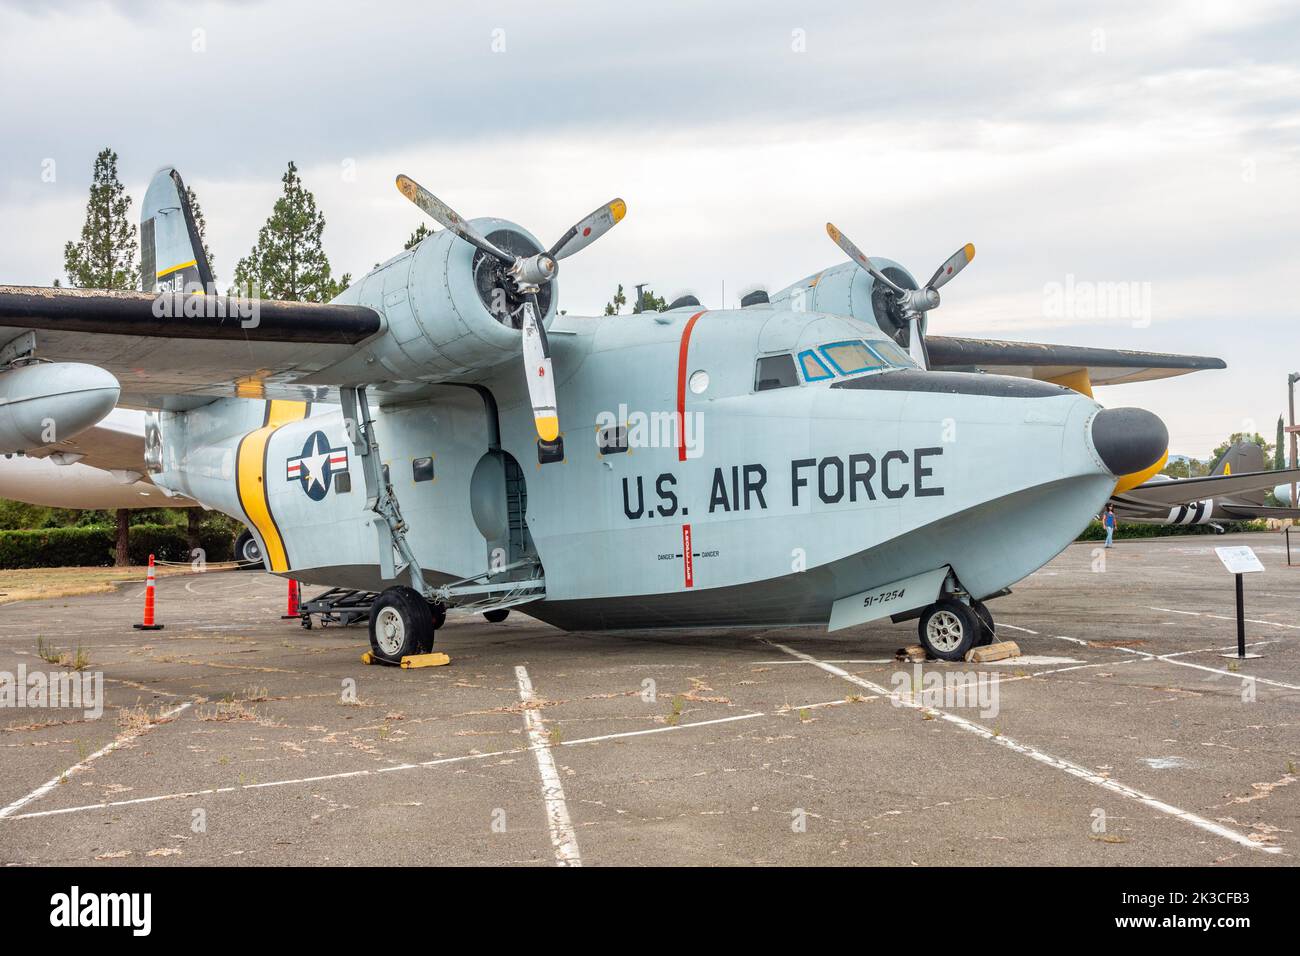 An American Grumman SA-16 Albatross amphibious search and rescue plane on display at The Travis Airforce Base in California, USA Stock Photo